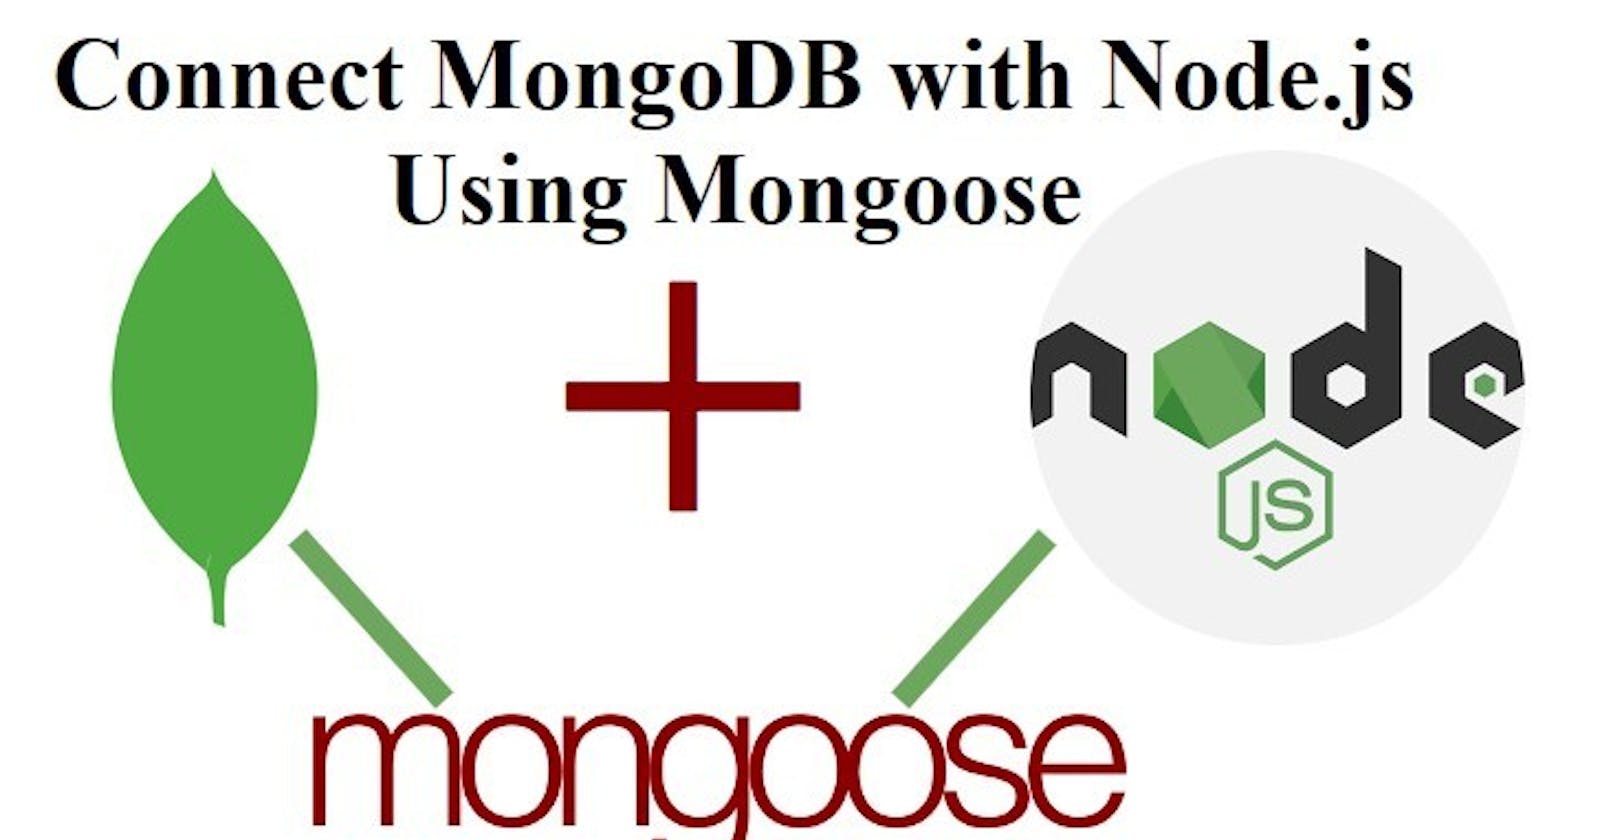 How to connect MongoDB with NodeJS Express using Mongoose